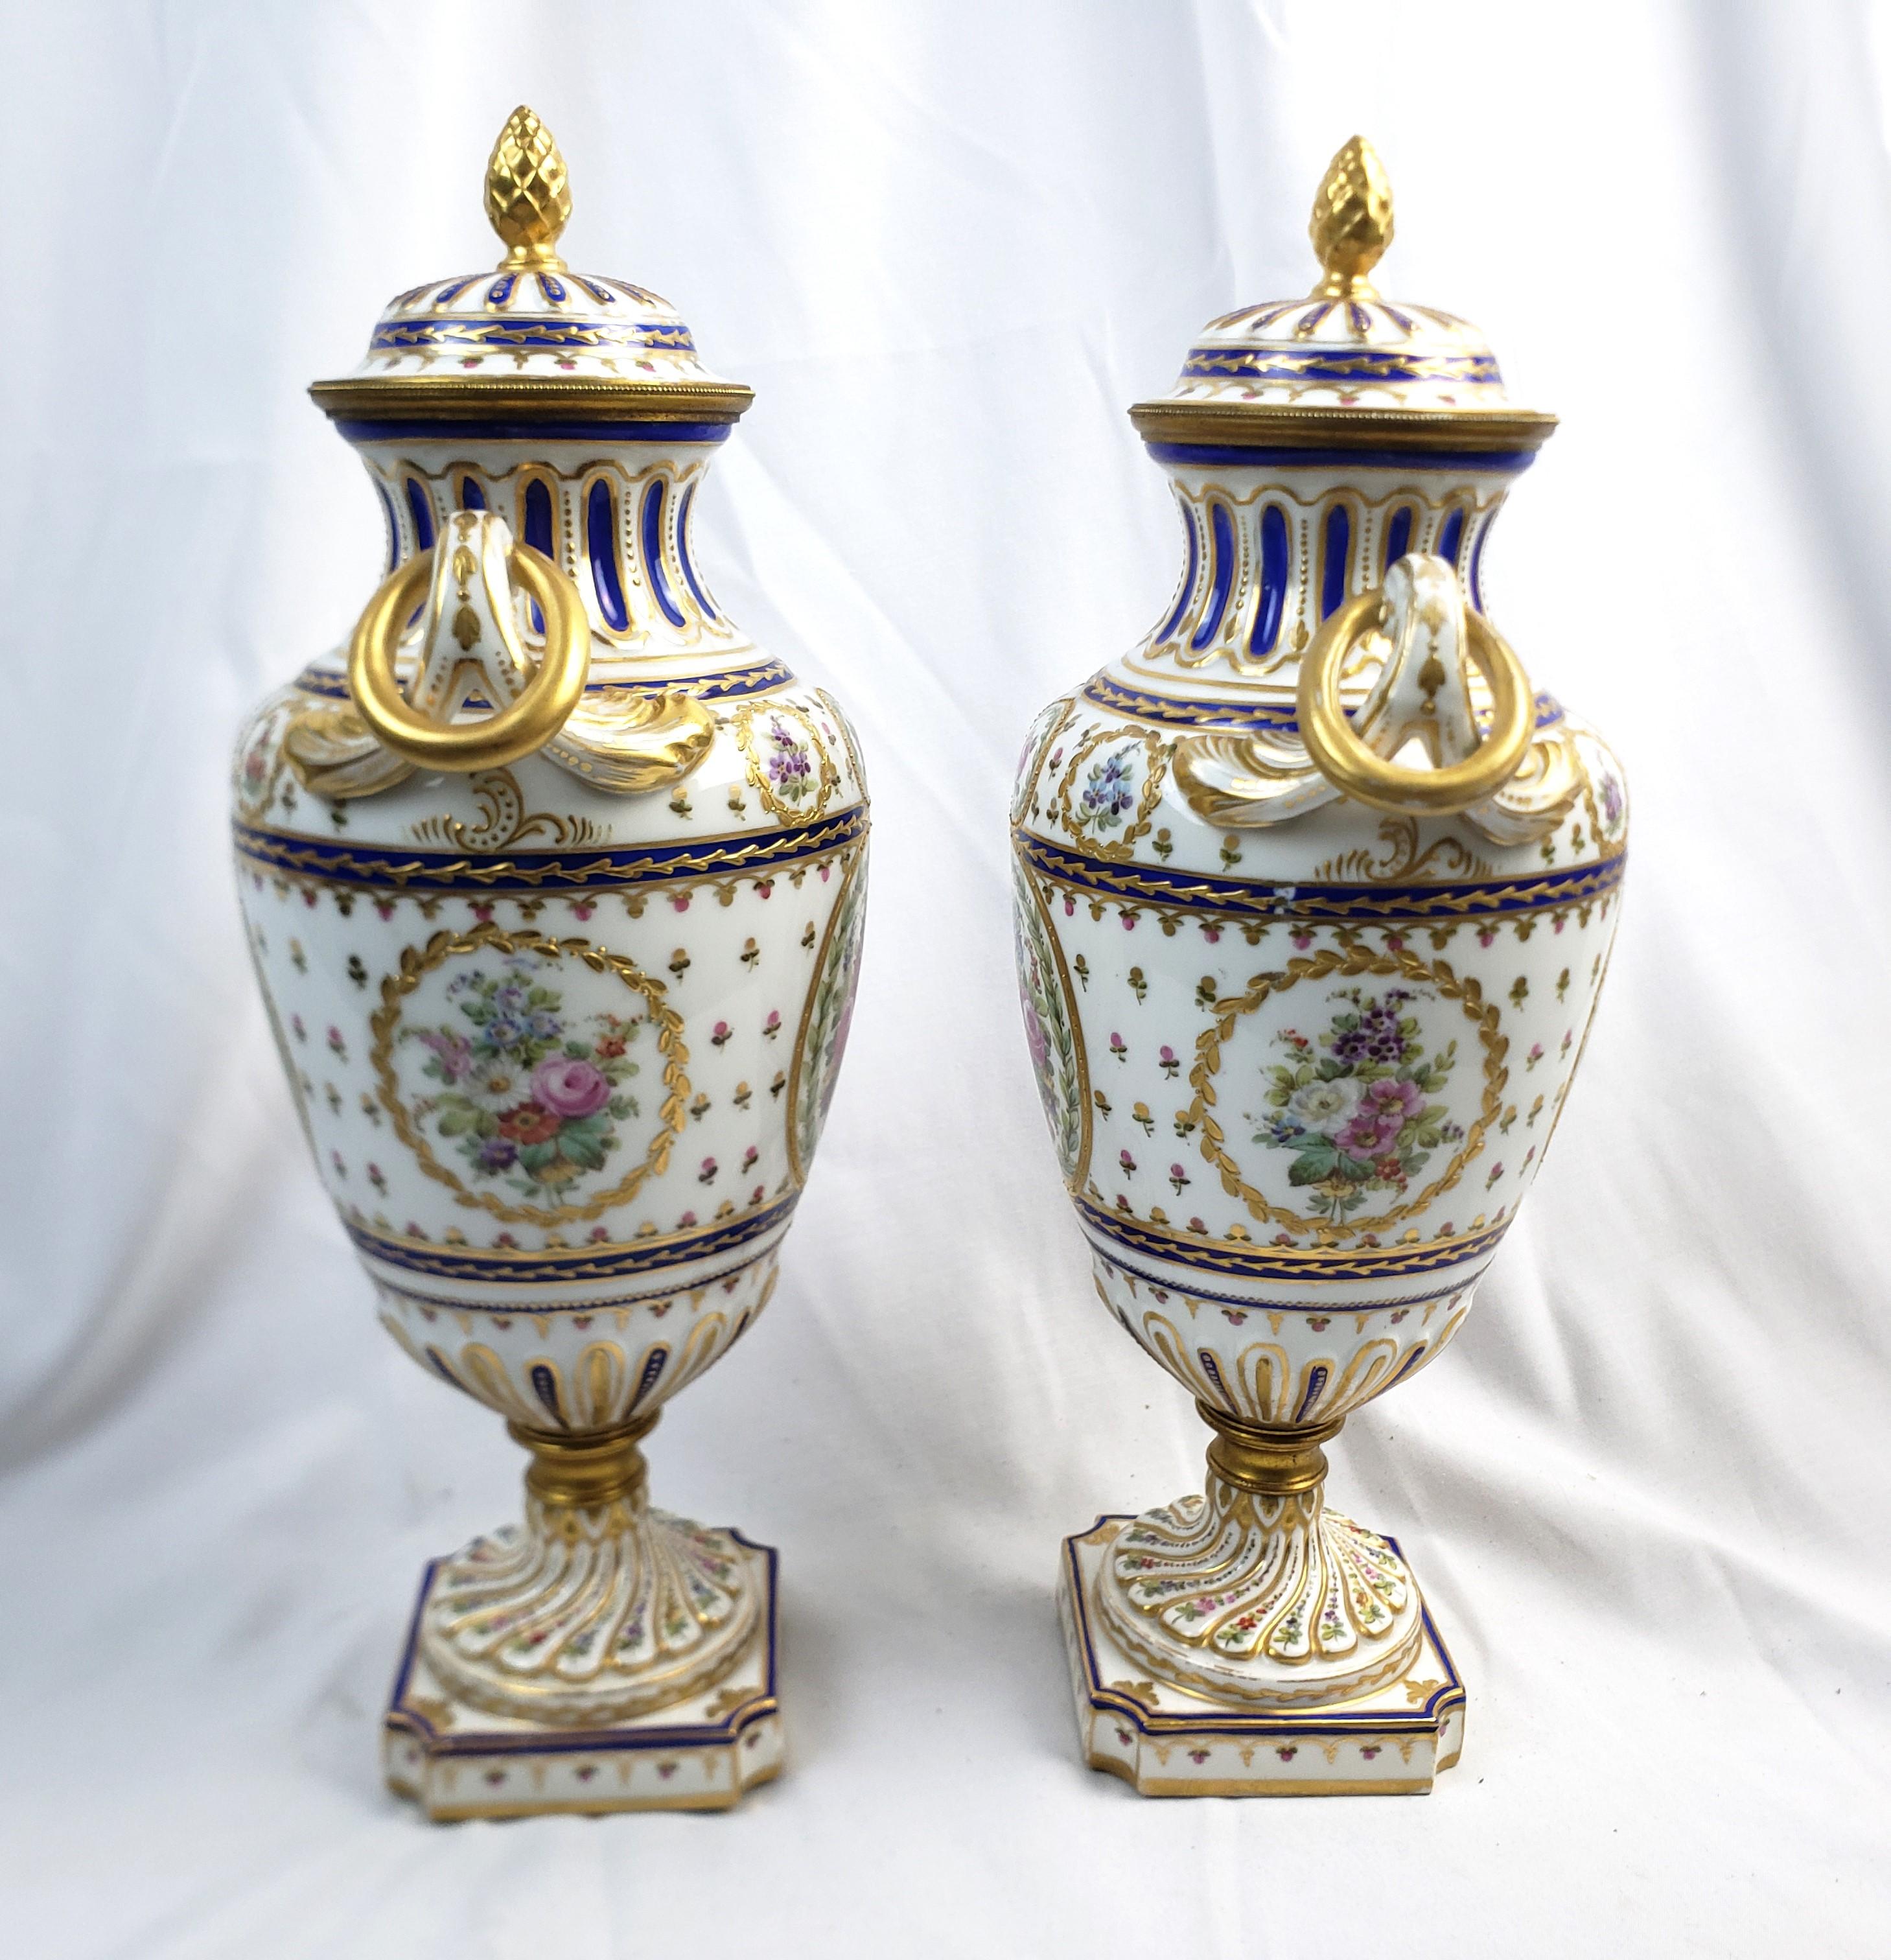 Glazed Pair of Antique Sevres Styled Covered Urns with Ornate Hand-Painted Decoration For Sale